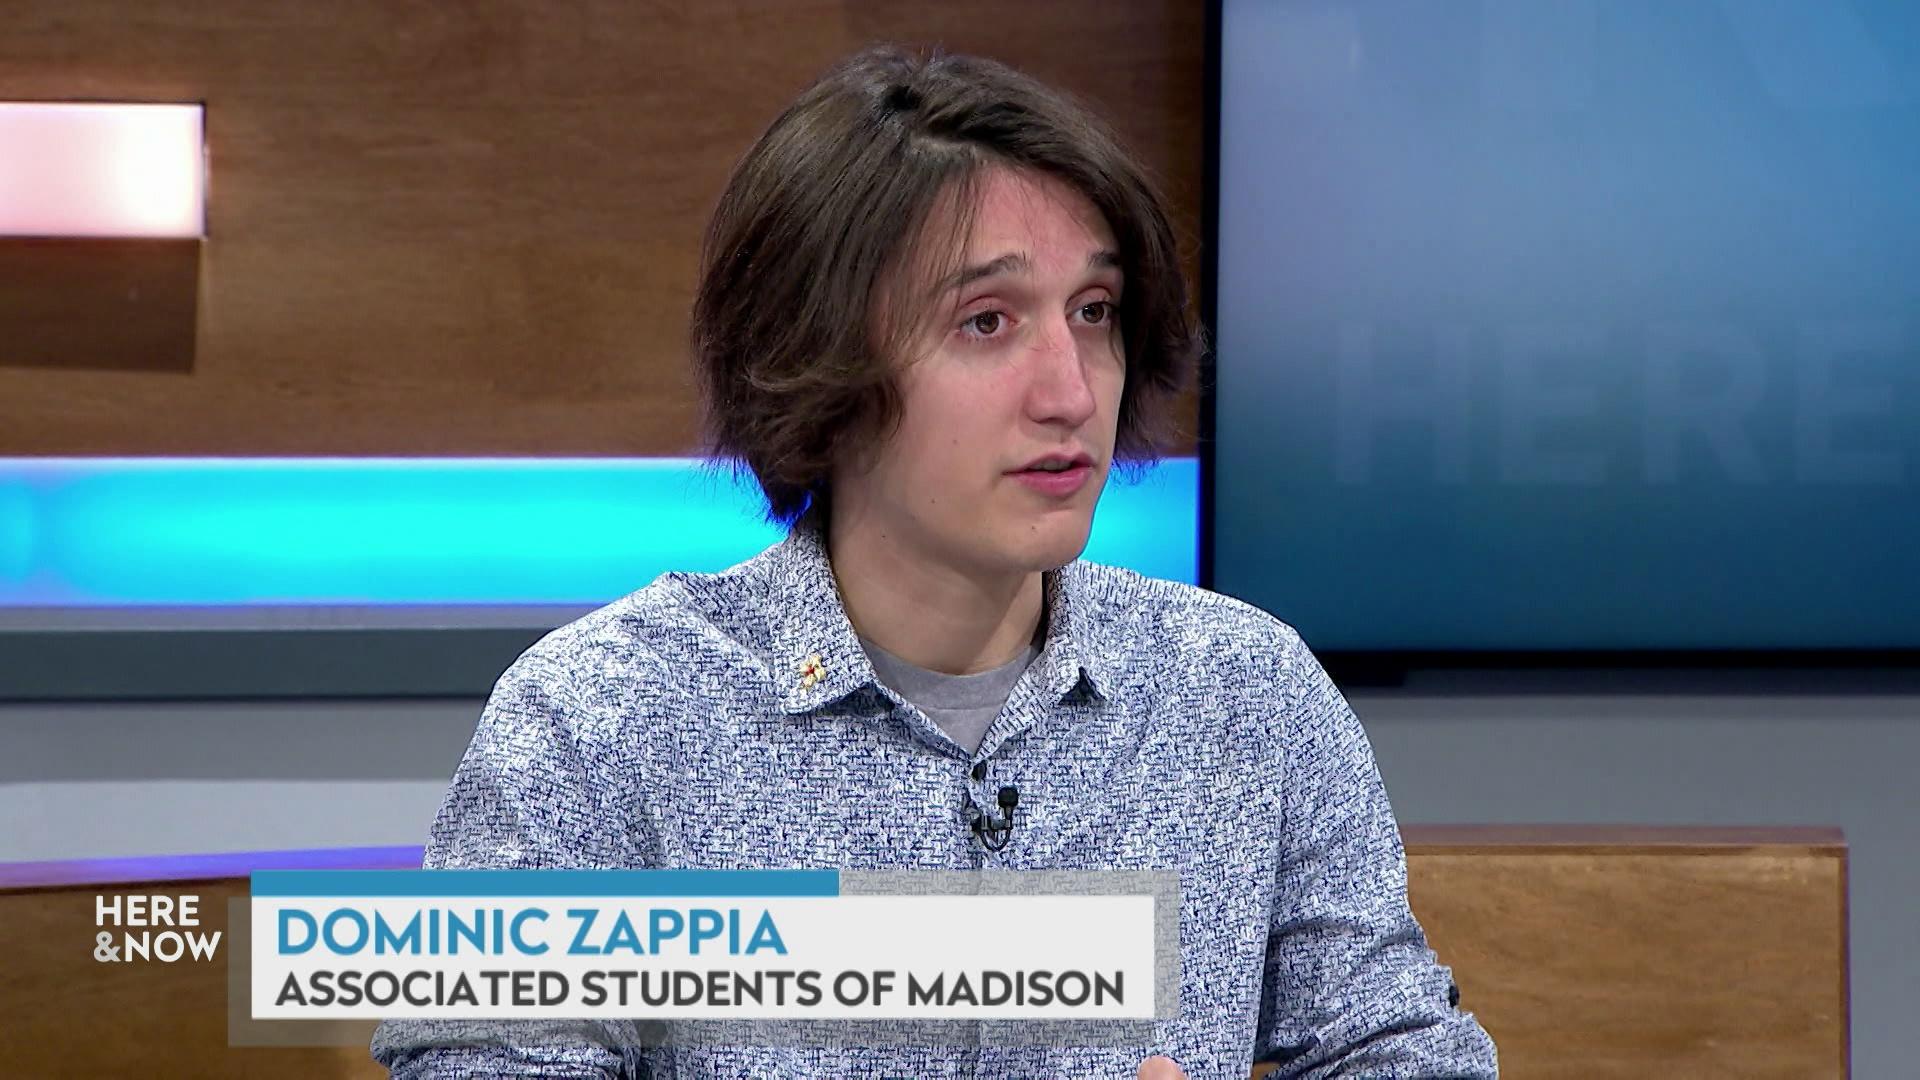 A still image shows Dominic Zappia seated at the 'Here & Now' set featuring wood paneling, with a graphic at bottom reading 'Dominic Zappia' and 'Associated Students of Madison.'